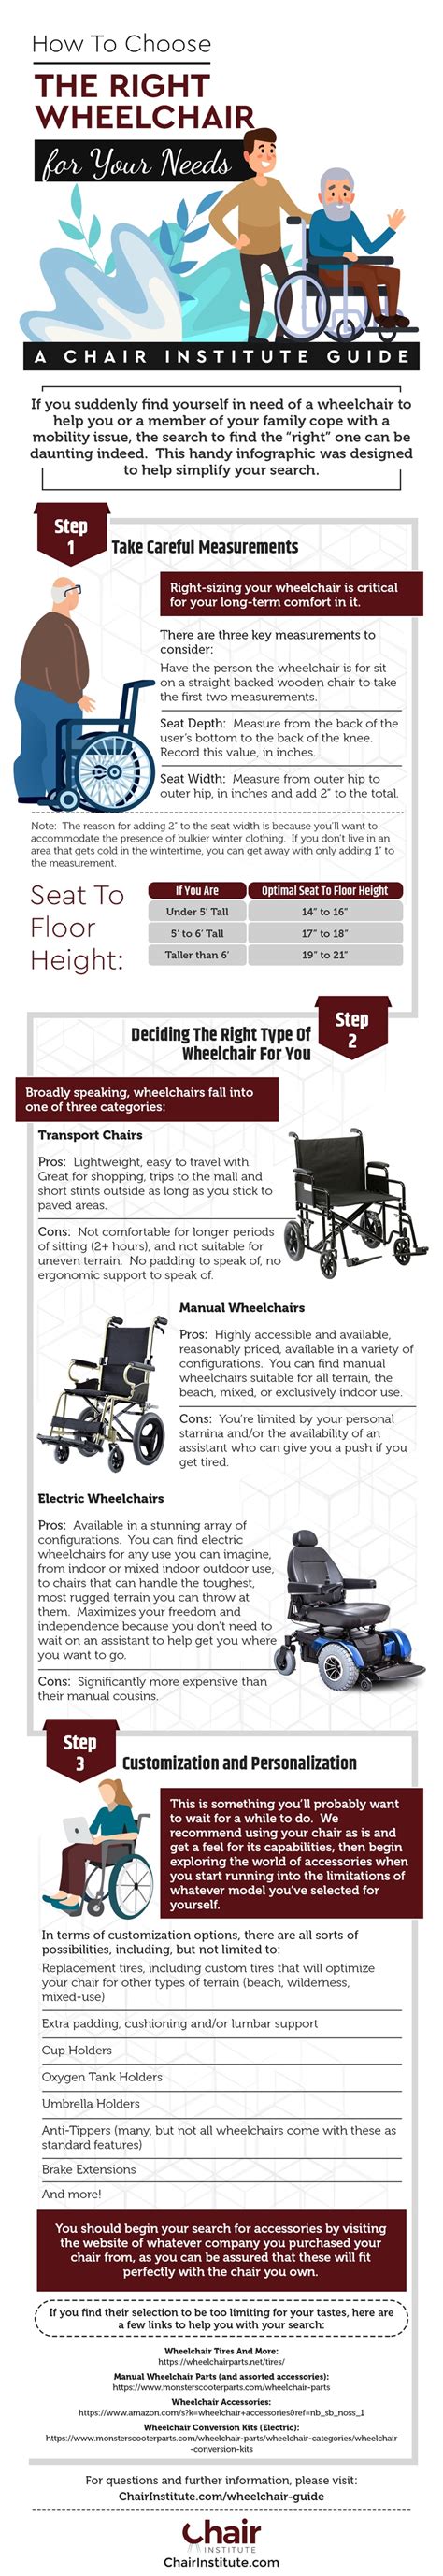 How To Choose A Wheelchair Chair Institute Buying Guide For 2022